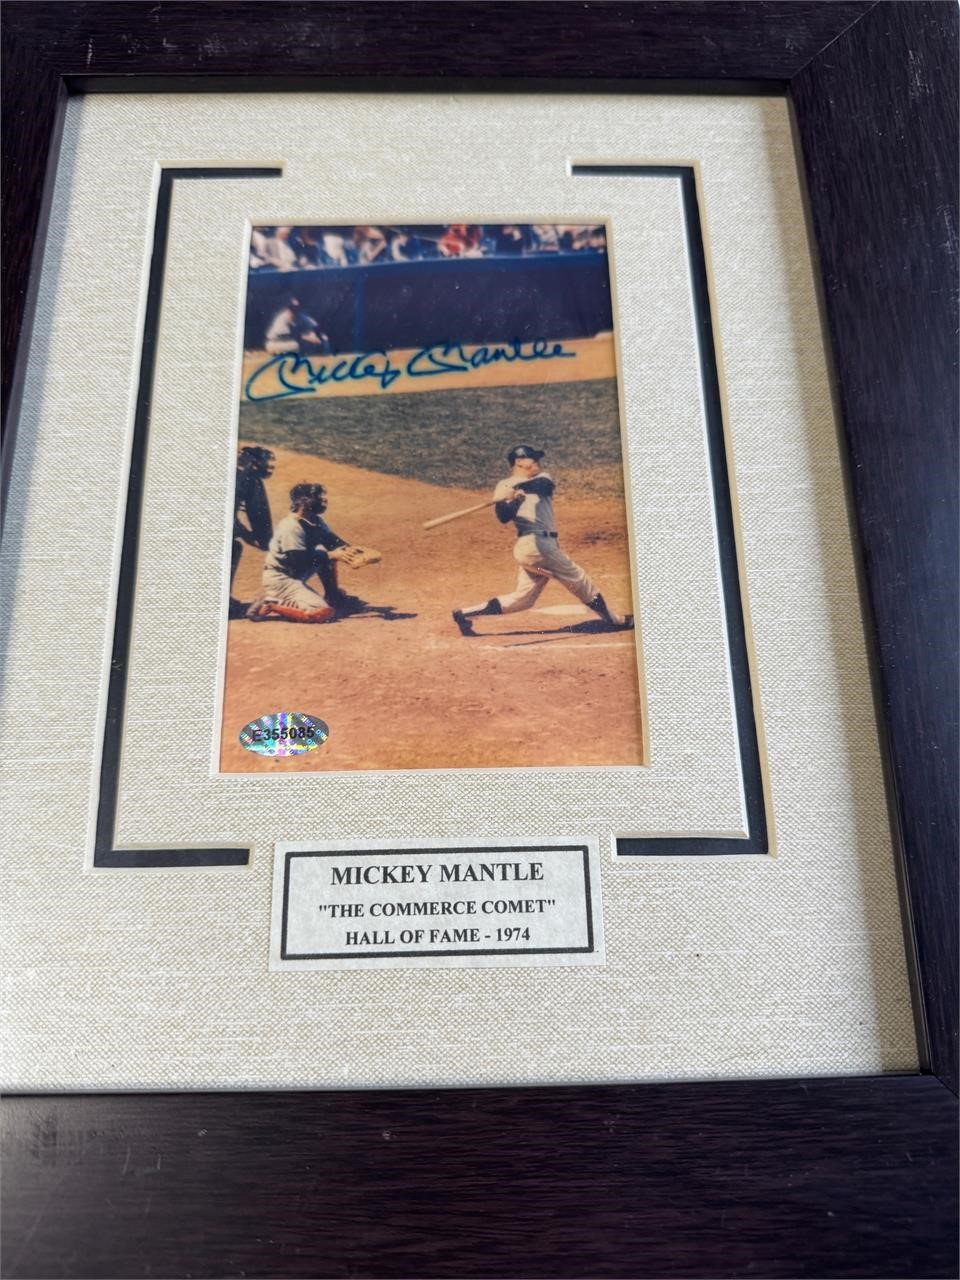 Holy Grail Sports Memorabilia Auction Extremely Rare items